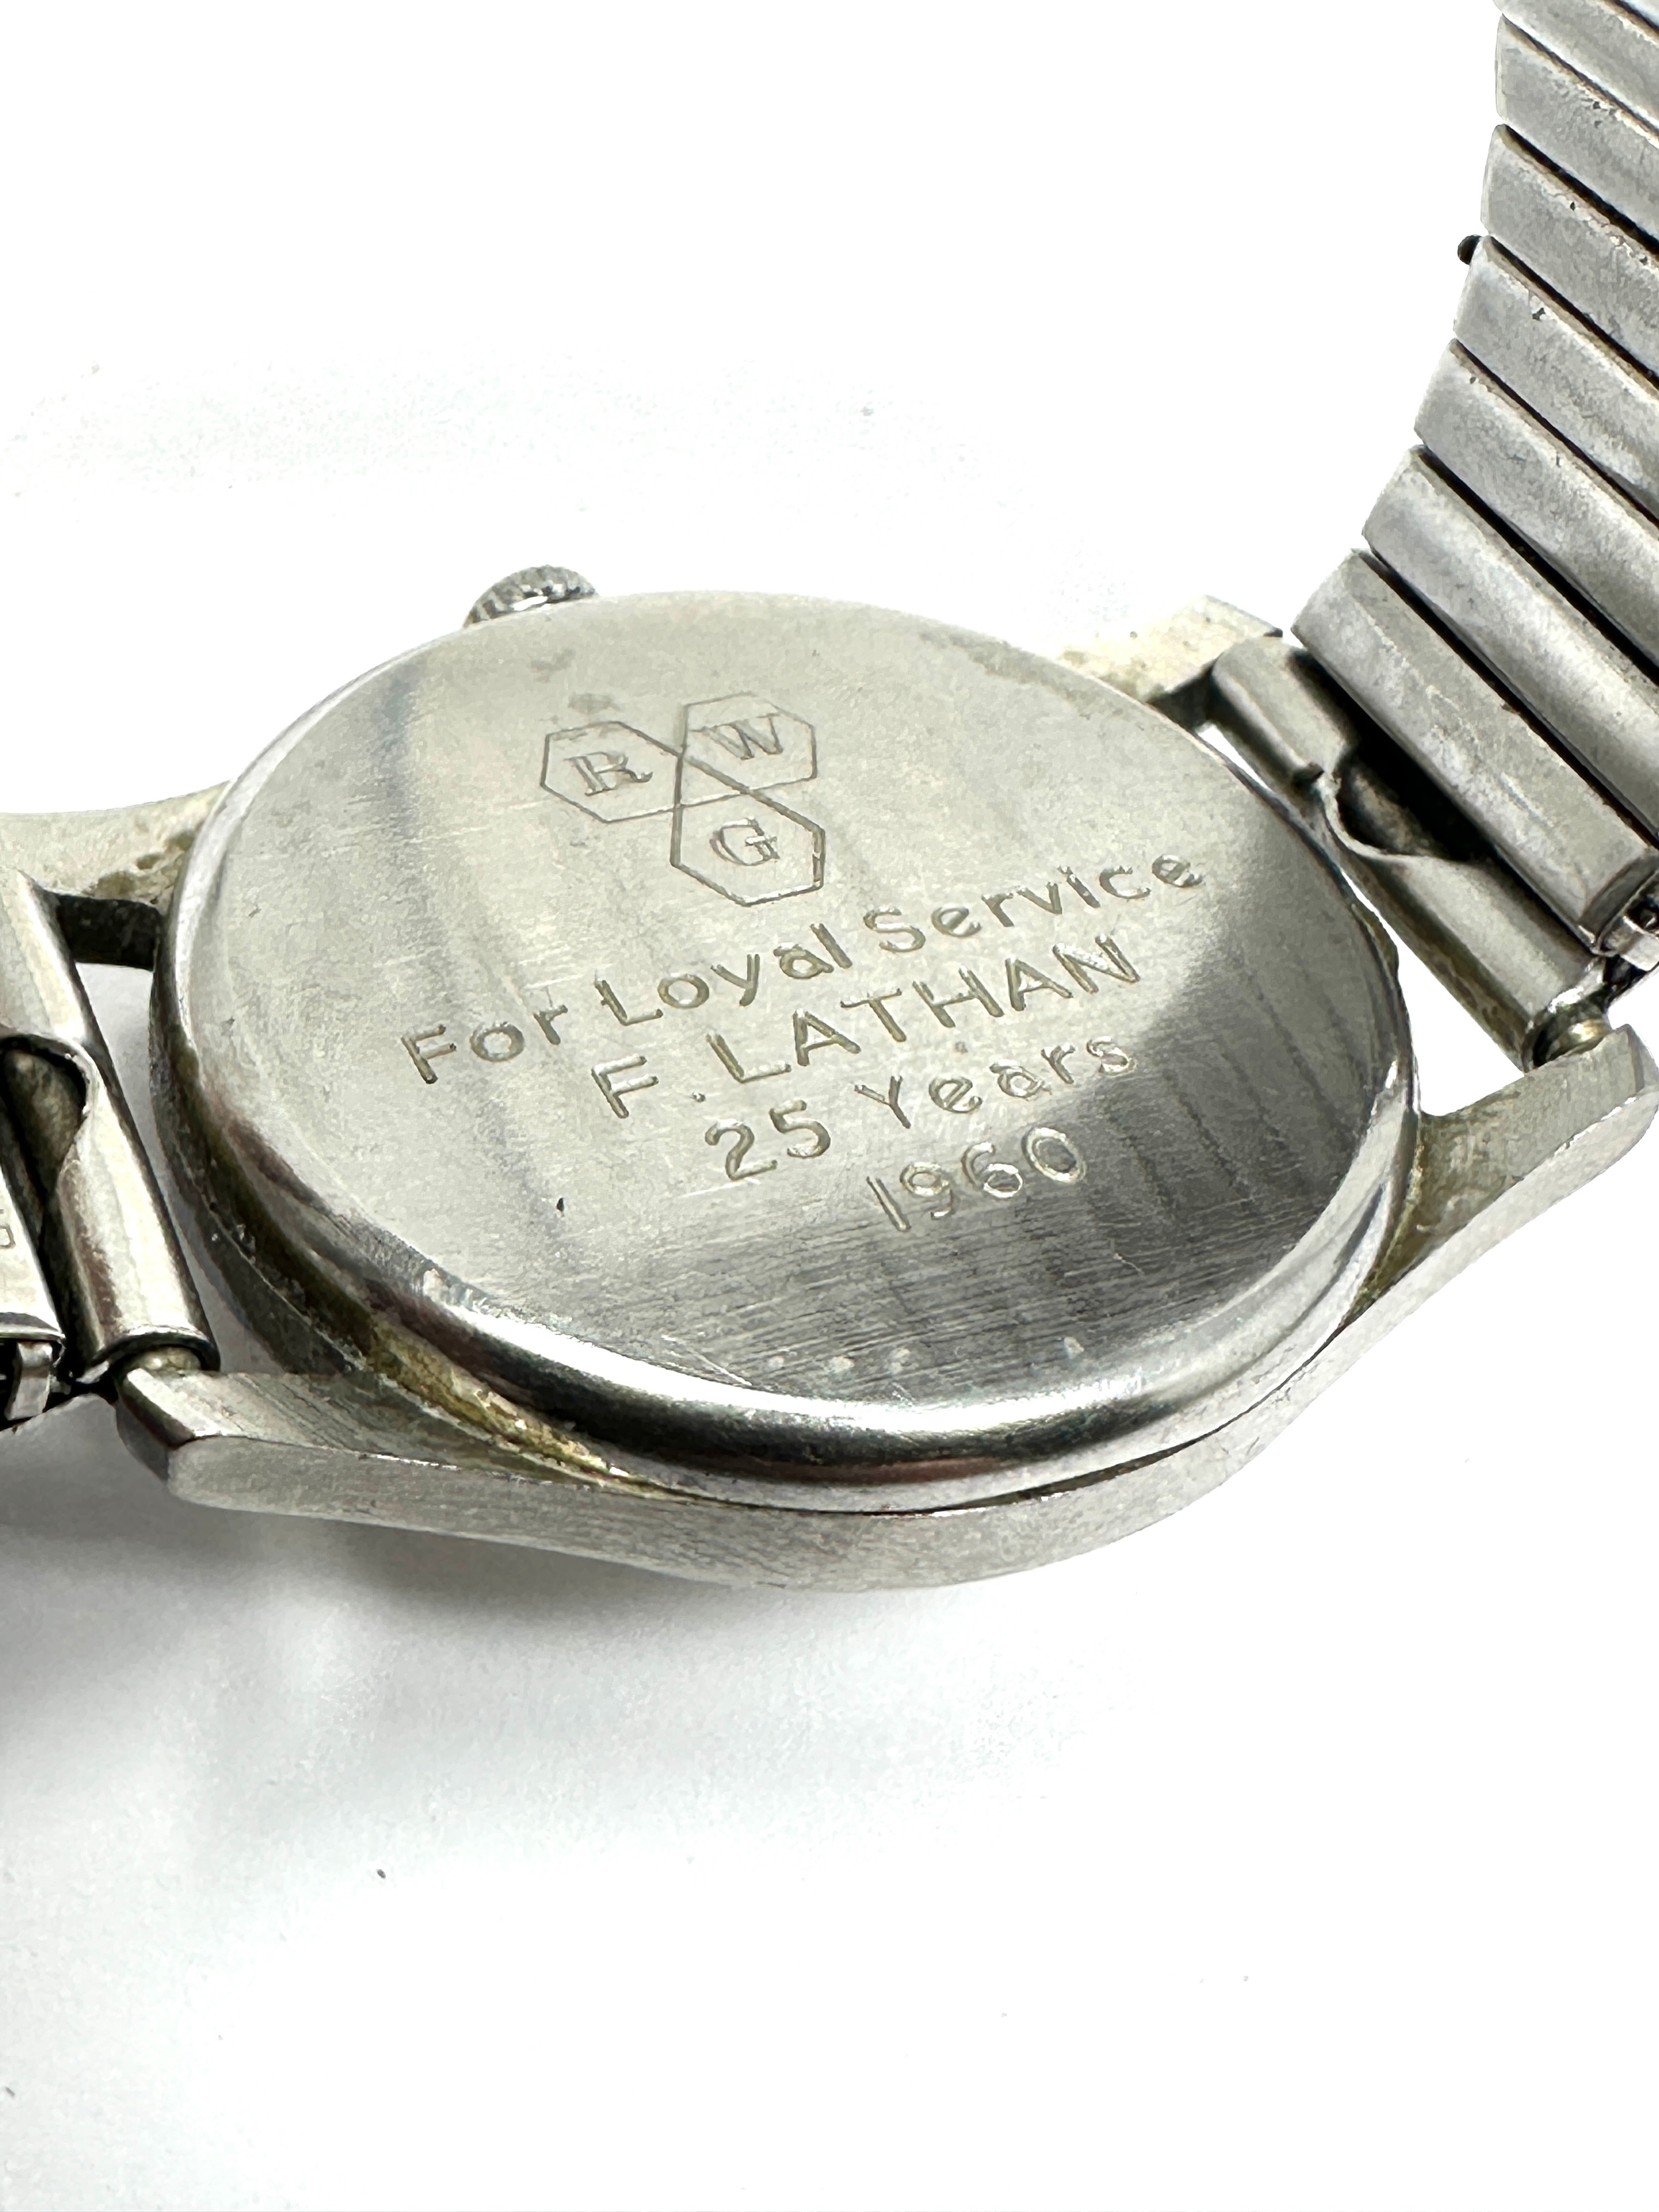 vintage 1960s tudor royal presentation wristwatch s/steel the watch is ticking - Image 4 of 4